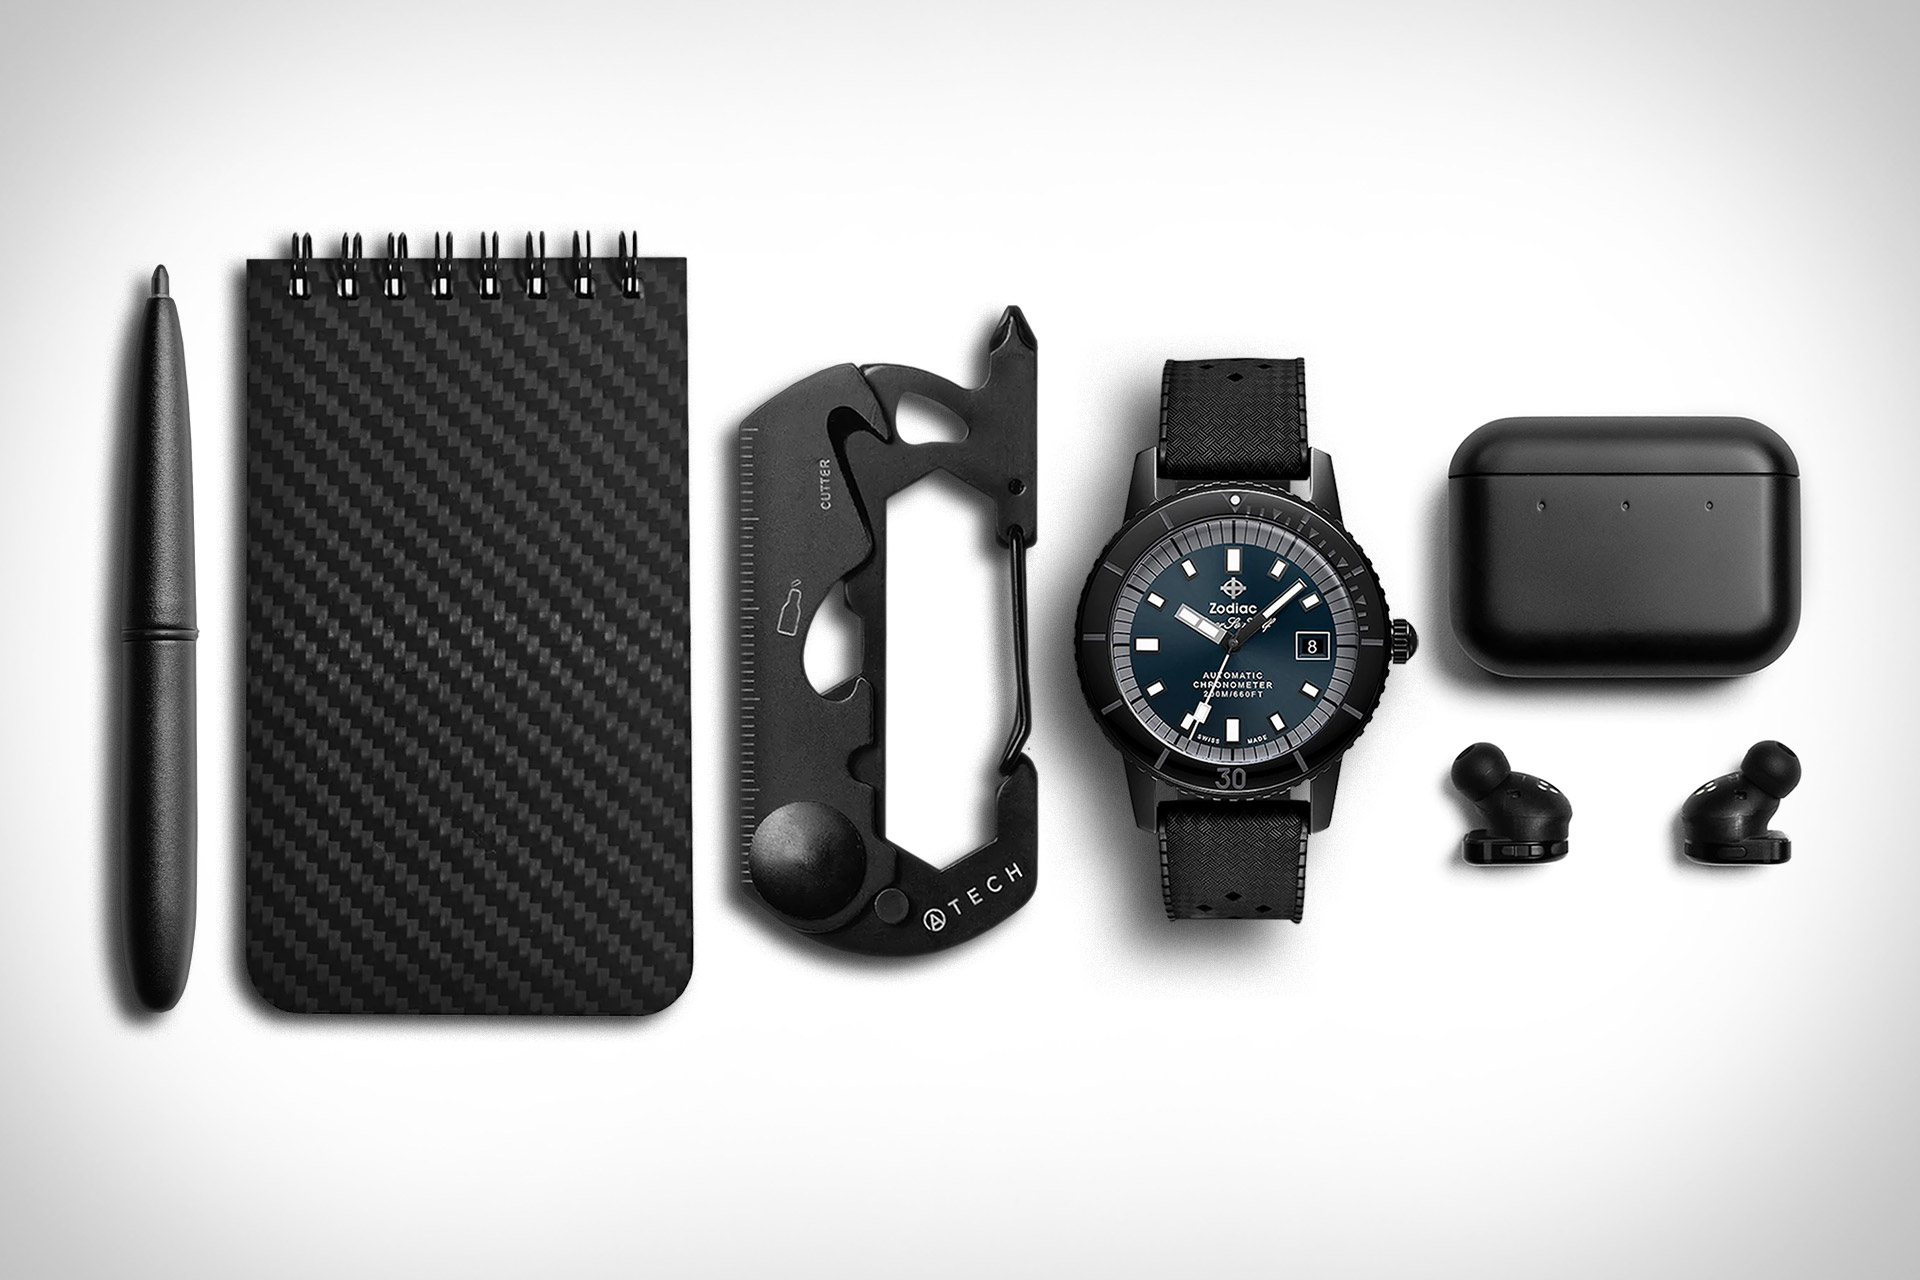 Everyday Carry: Take Note | Uncrate, #Everyday #Carry #Note #Uncrate